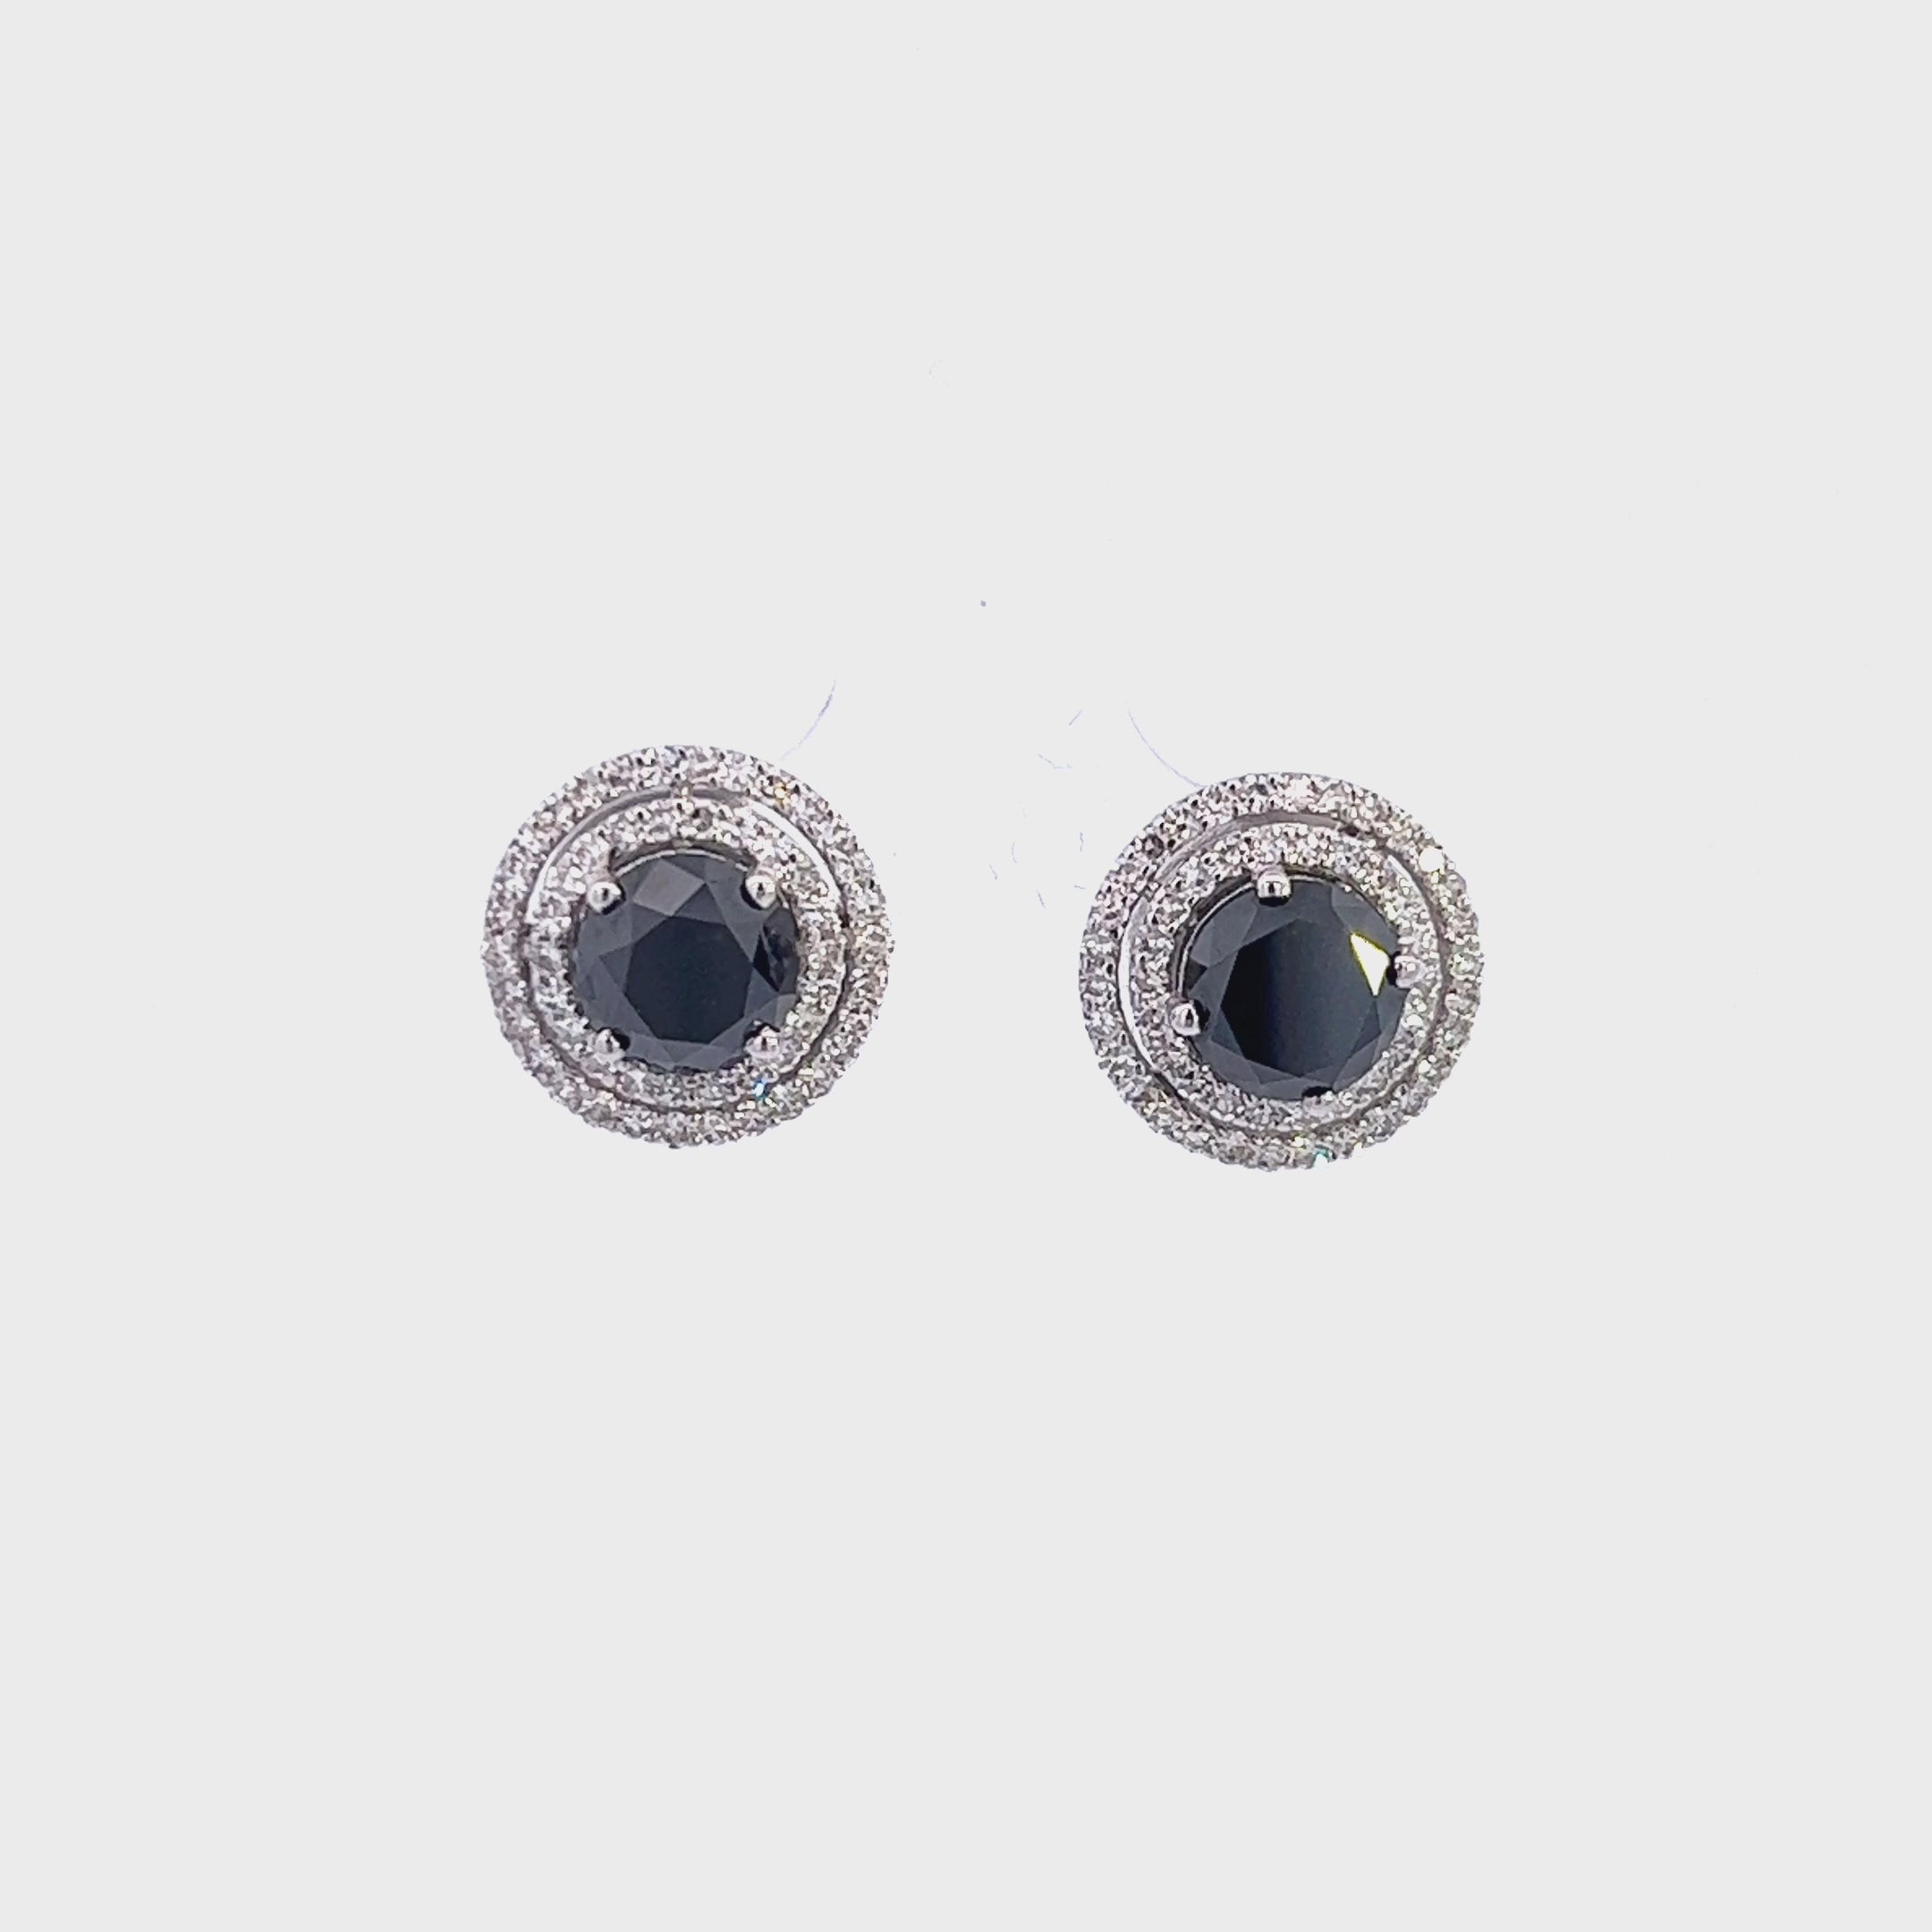 Round And Fancy Black Stone Cut Diamond Gold Stud Earring